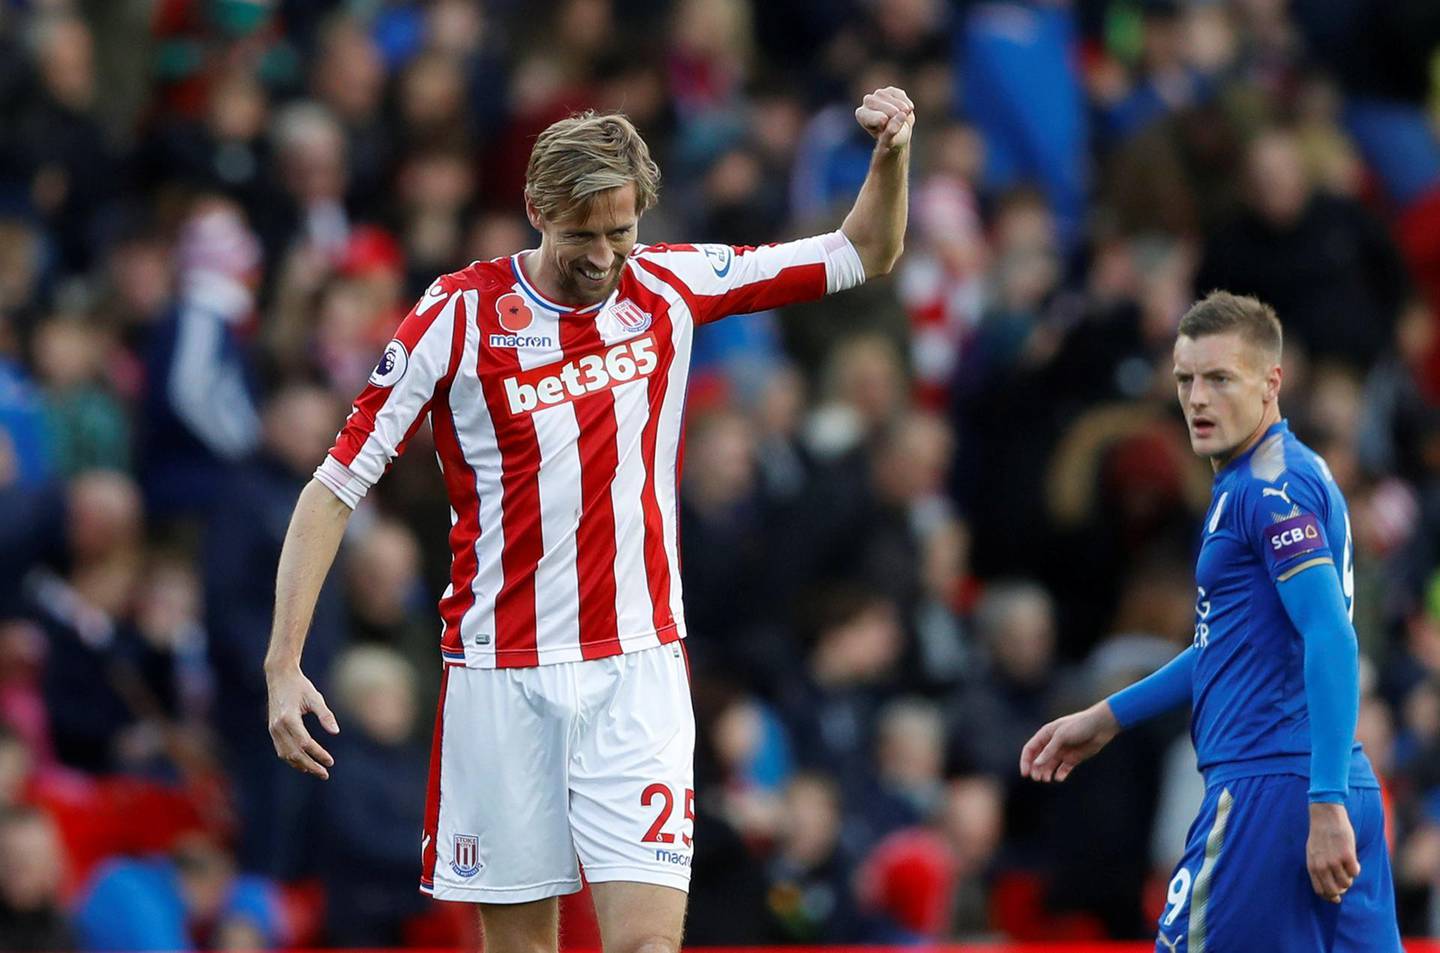 Soccer Football - Premier League - Stoke City vs Leicester City - bet365 Stadium, Stoke-on-Trent, Britain - November 4, 2017   Stoke City's Peter Crouch celebrates scoring their second goal                Action Images via Reuters/Carl Recine  EDITORIAL USE ONLY. No use with unauthorized audio, video, data, fixture lists, club/league logos or "live" services. Online in-match use limited to 75 images, no video emulation. No use in betting, games or single club/league/player publications. Please contact your account representative for further details.